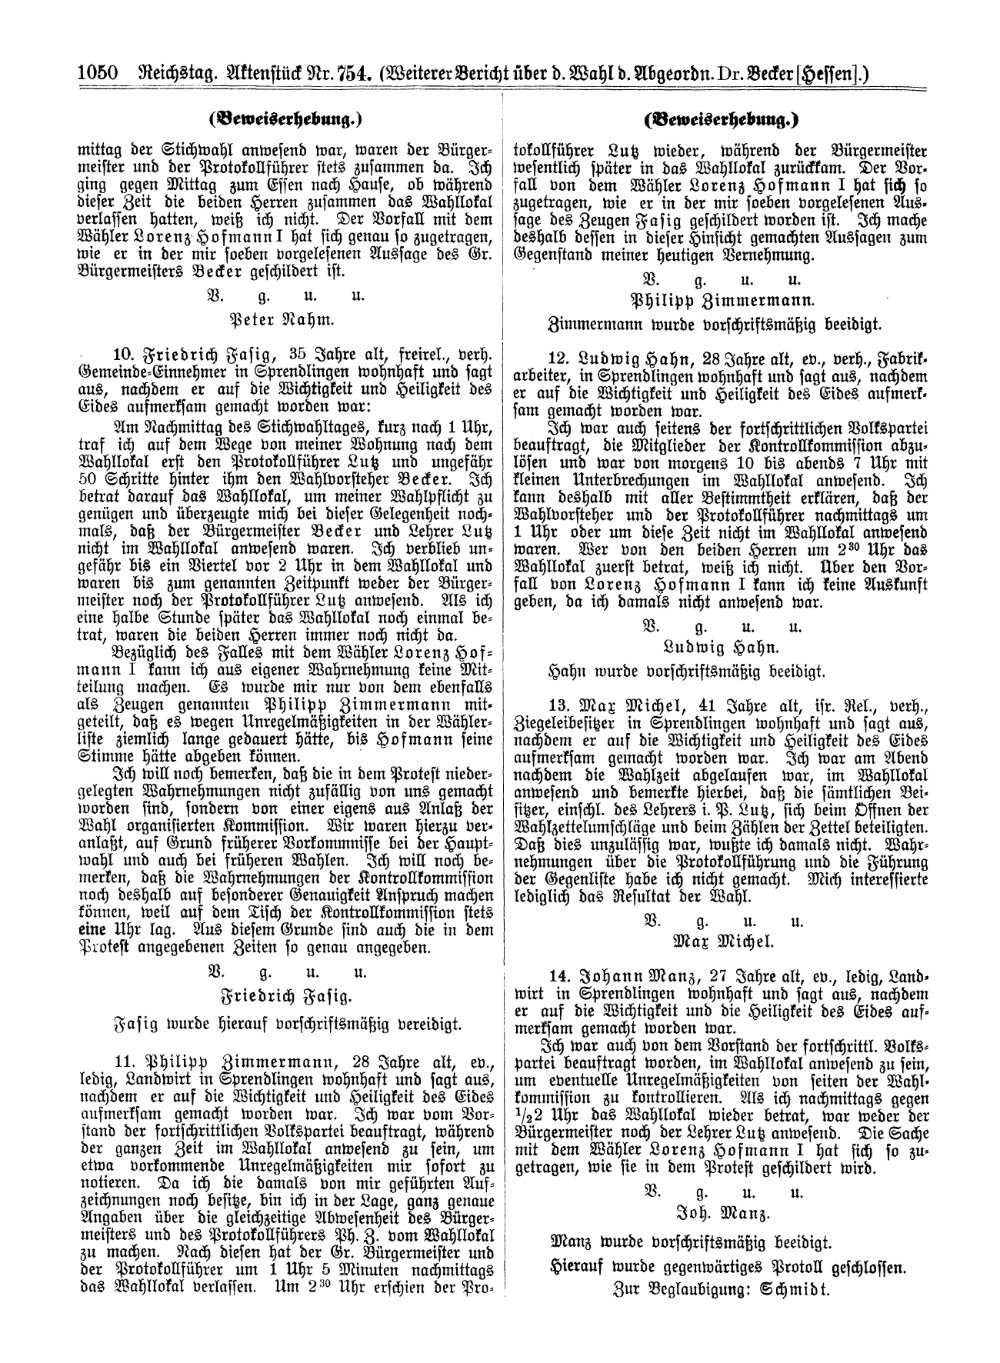 Scan of page 1050